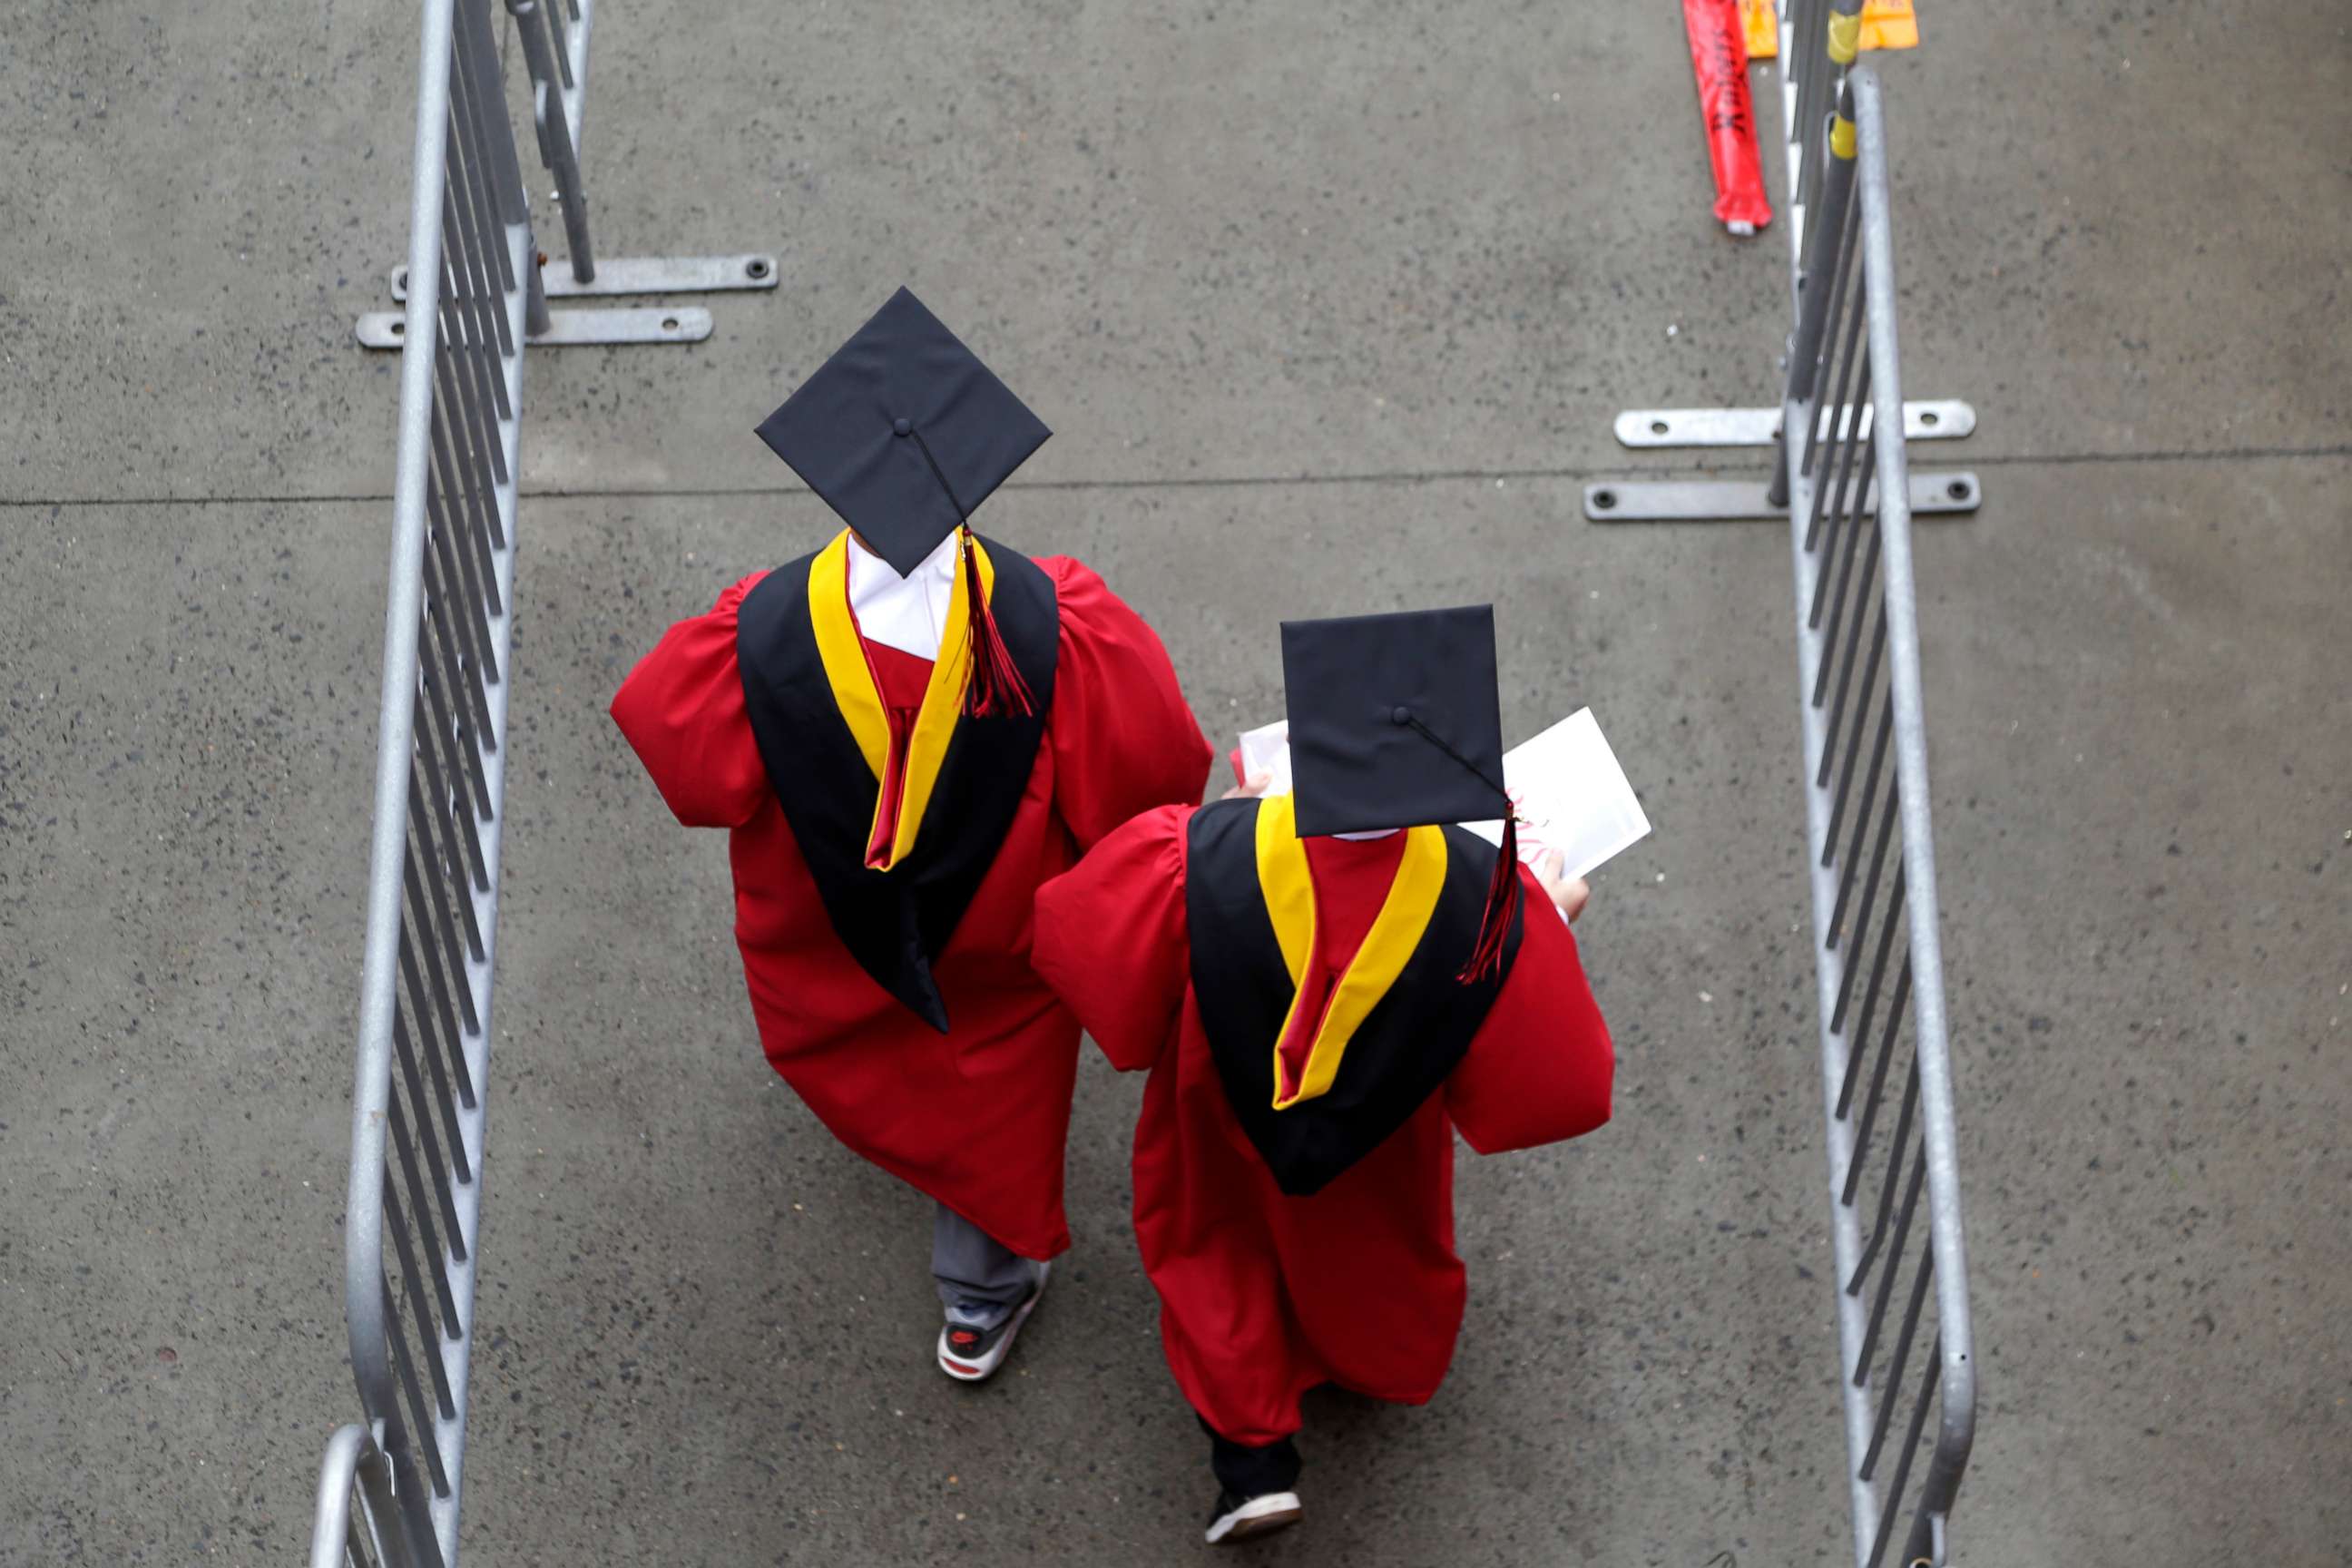 PHOTO: New graduates walk into the High Point Solutions Stadium before the start of the Rutgers University graduation ceremony in Piscataway Township, N.J., May 13, 2018.